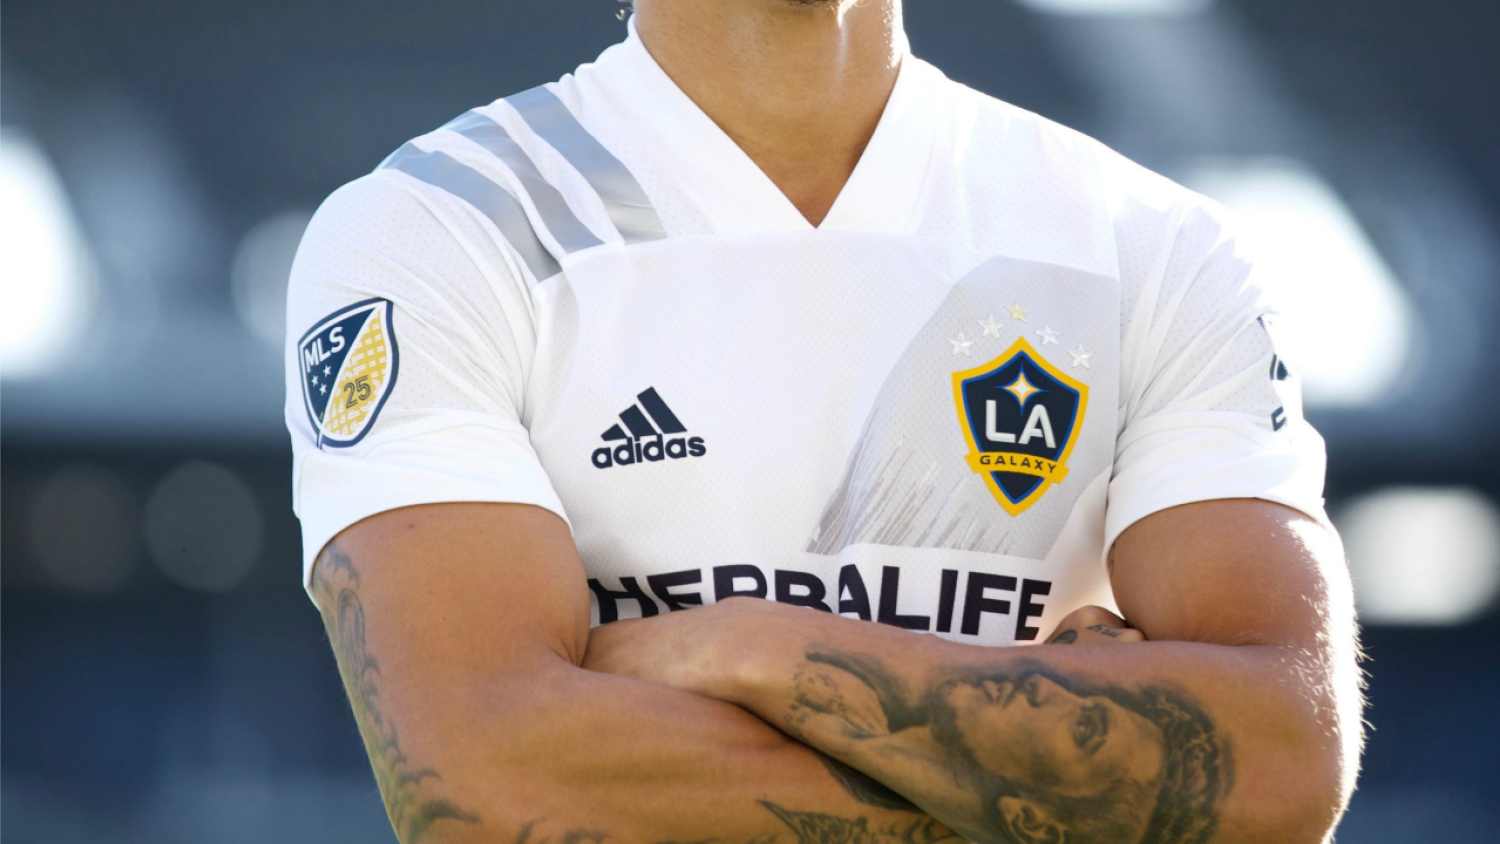 Everything We Know About The 2020 MLS Jerseys So Far